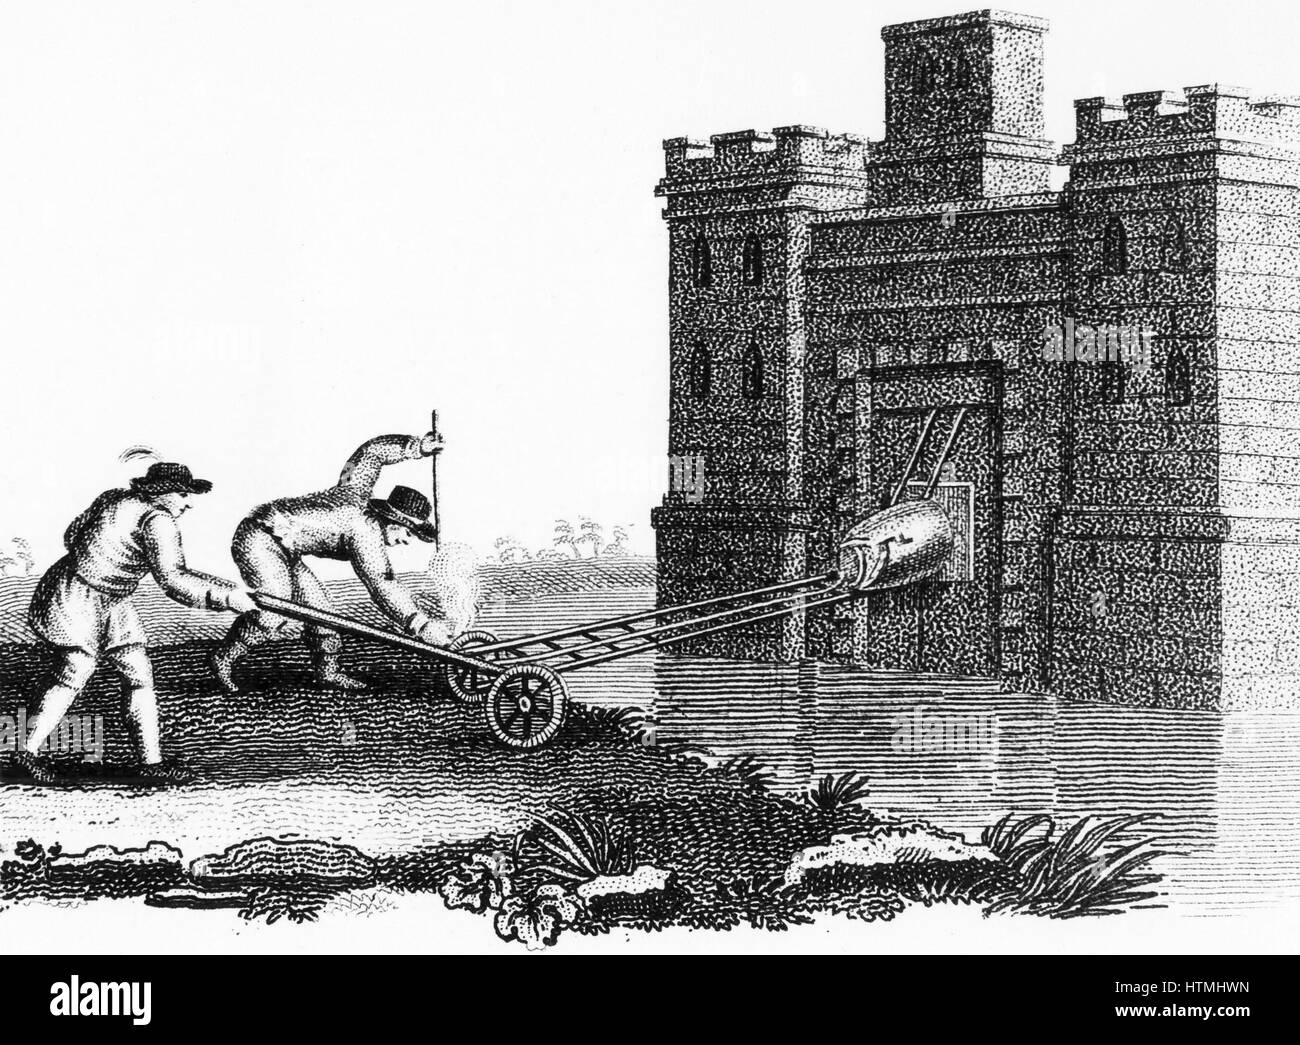 Method of fixing petard (explosive device) to fortress gateway when protected by moat. Stipple engraving c1800 Stock Photo